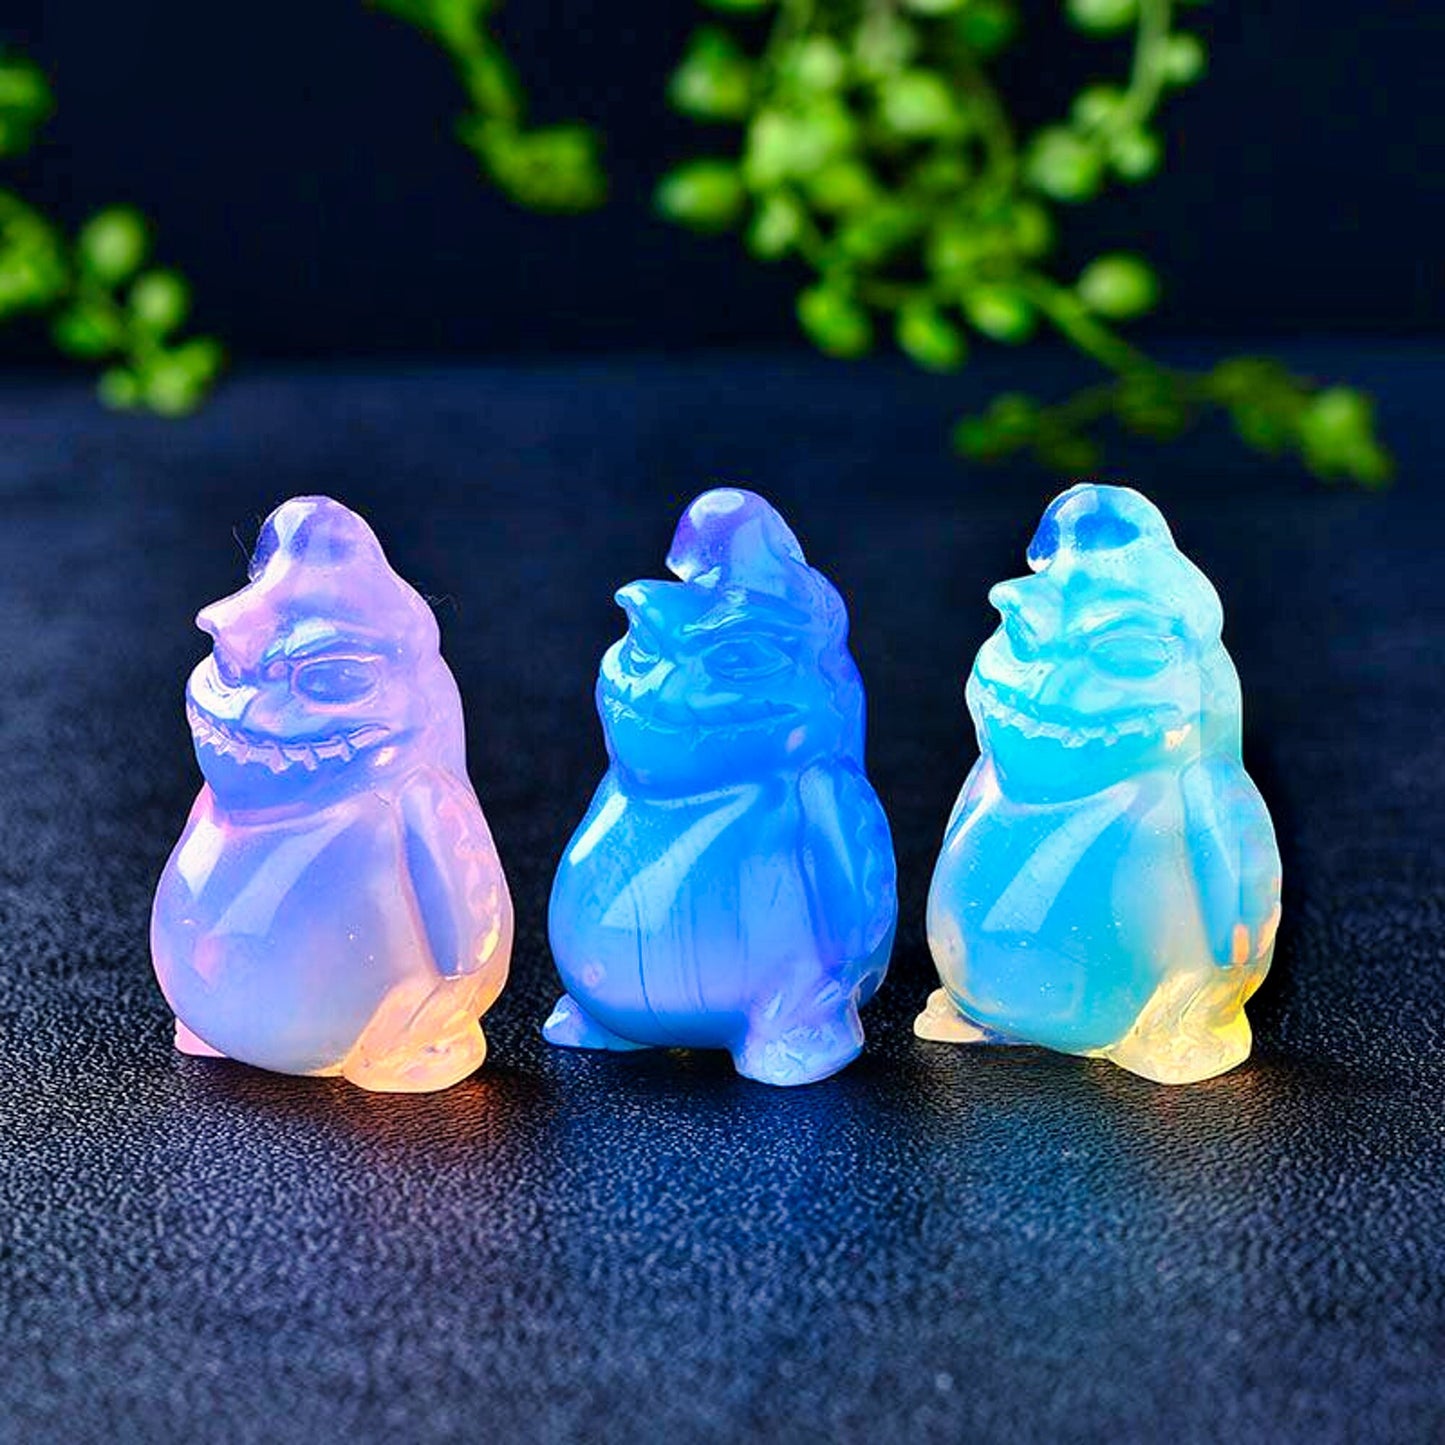 Natural Opal Stone Bag Clown Hand Carved Crystal Figurine - Set of 3 | Fashion Home Decor Gift